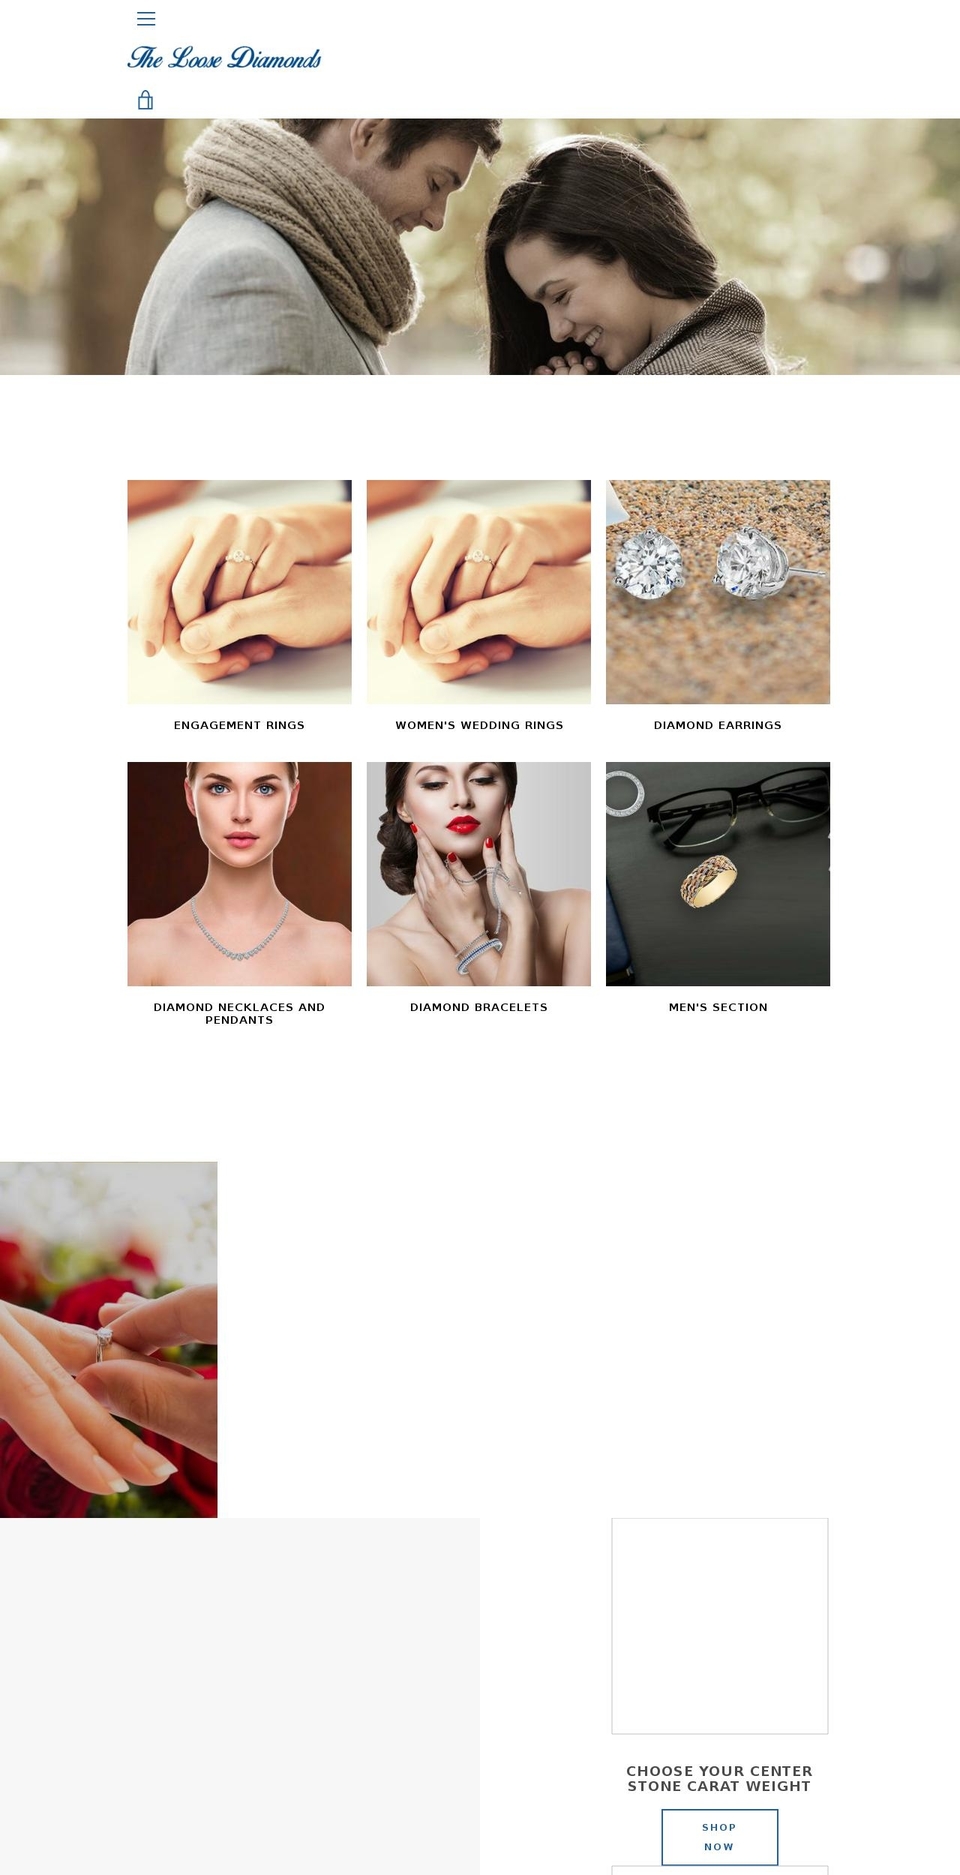 Copy of Narrative Shopify theme site example theloosediamonds.com